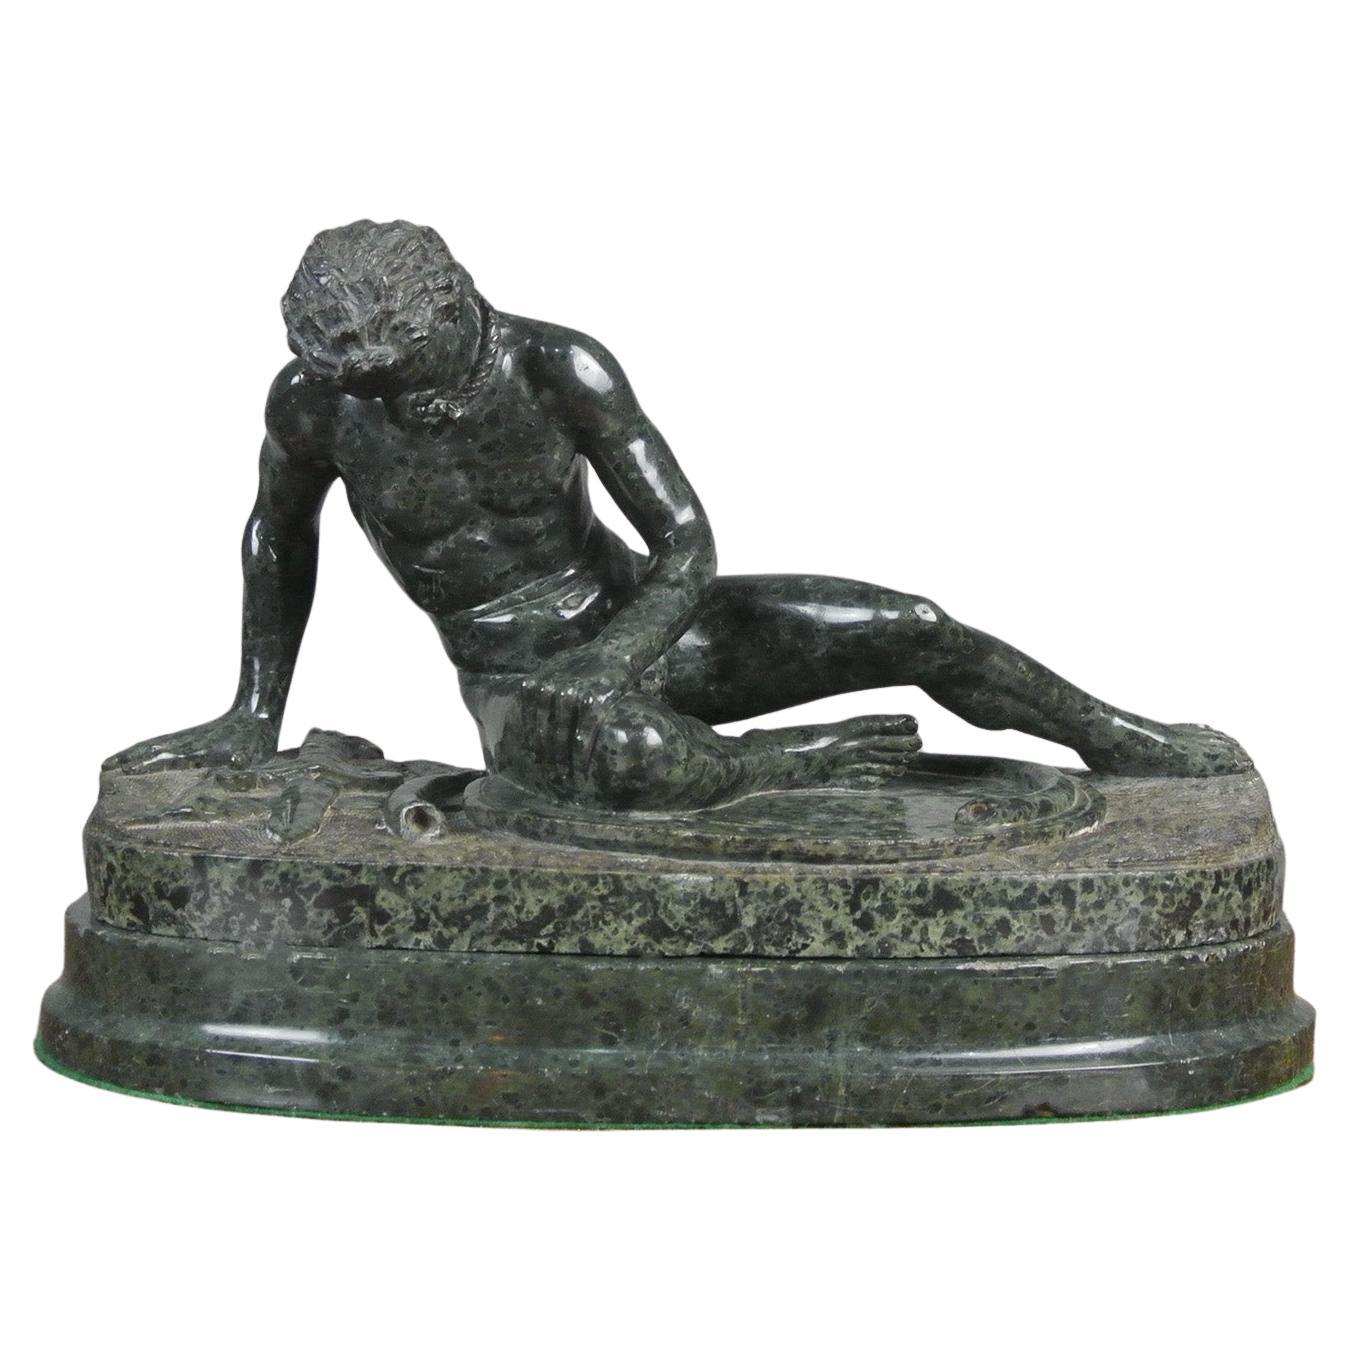 Early, Large and Fine Grand Tour Serpentine Sculpture of the Dying Gaul c. 1850 For Sale